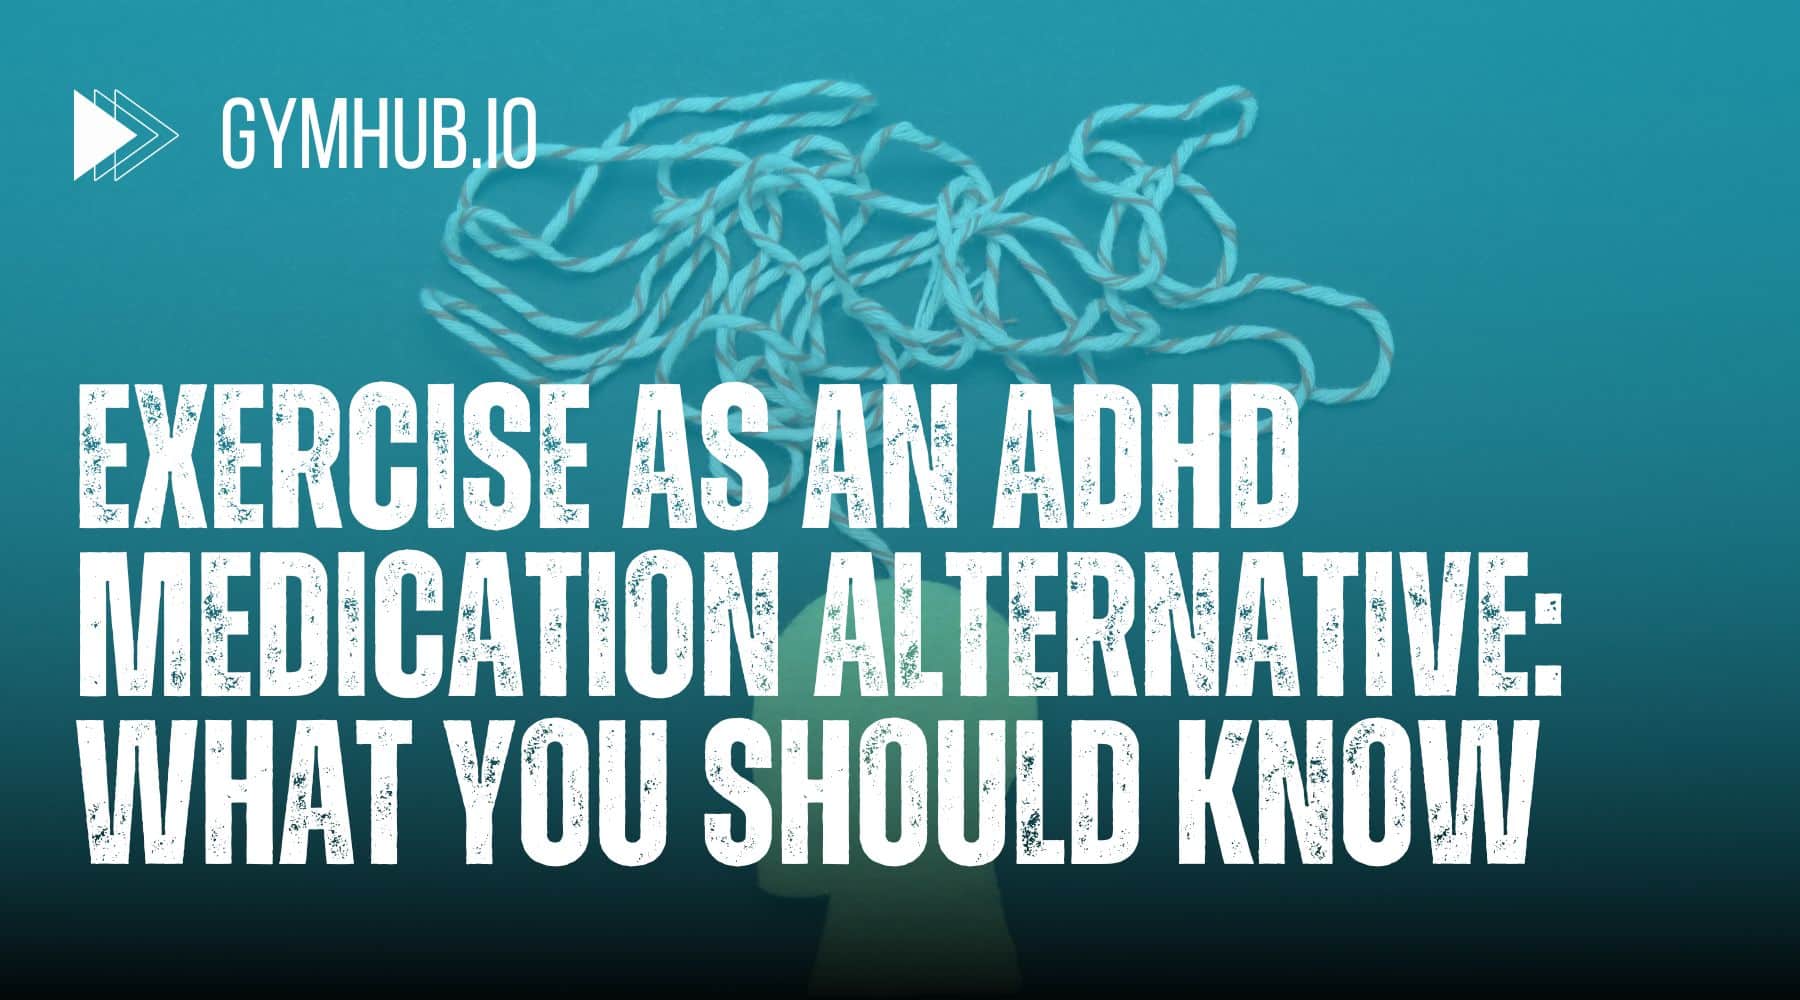 Exercise as an ADHD Medication Alternative: What You Should Know